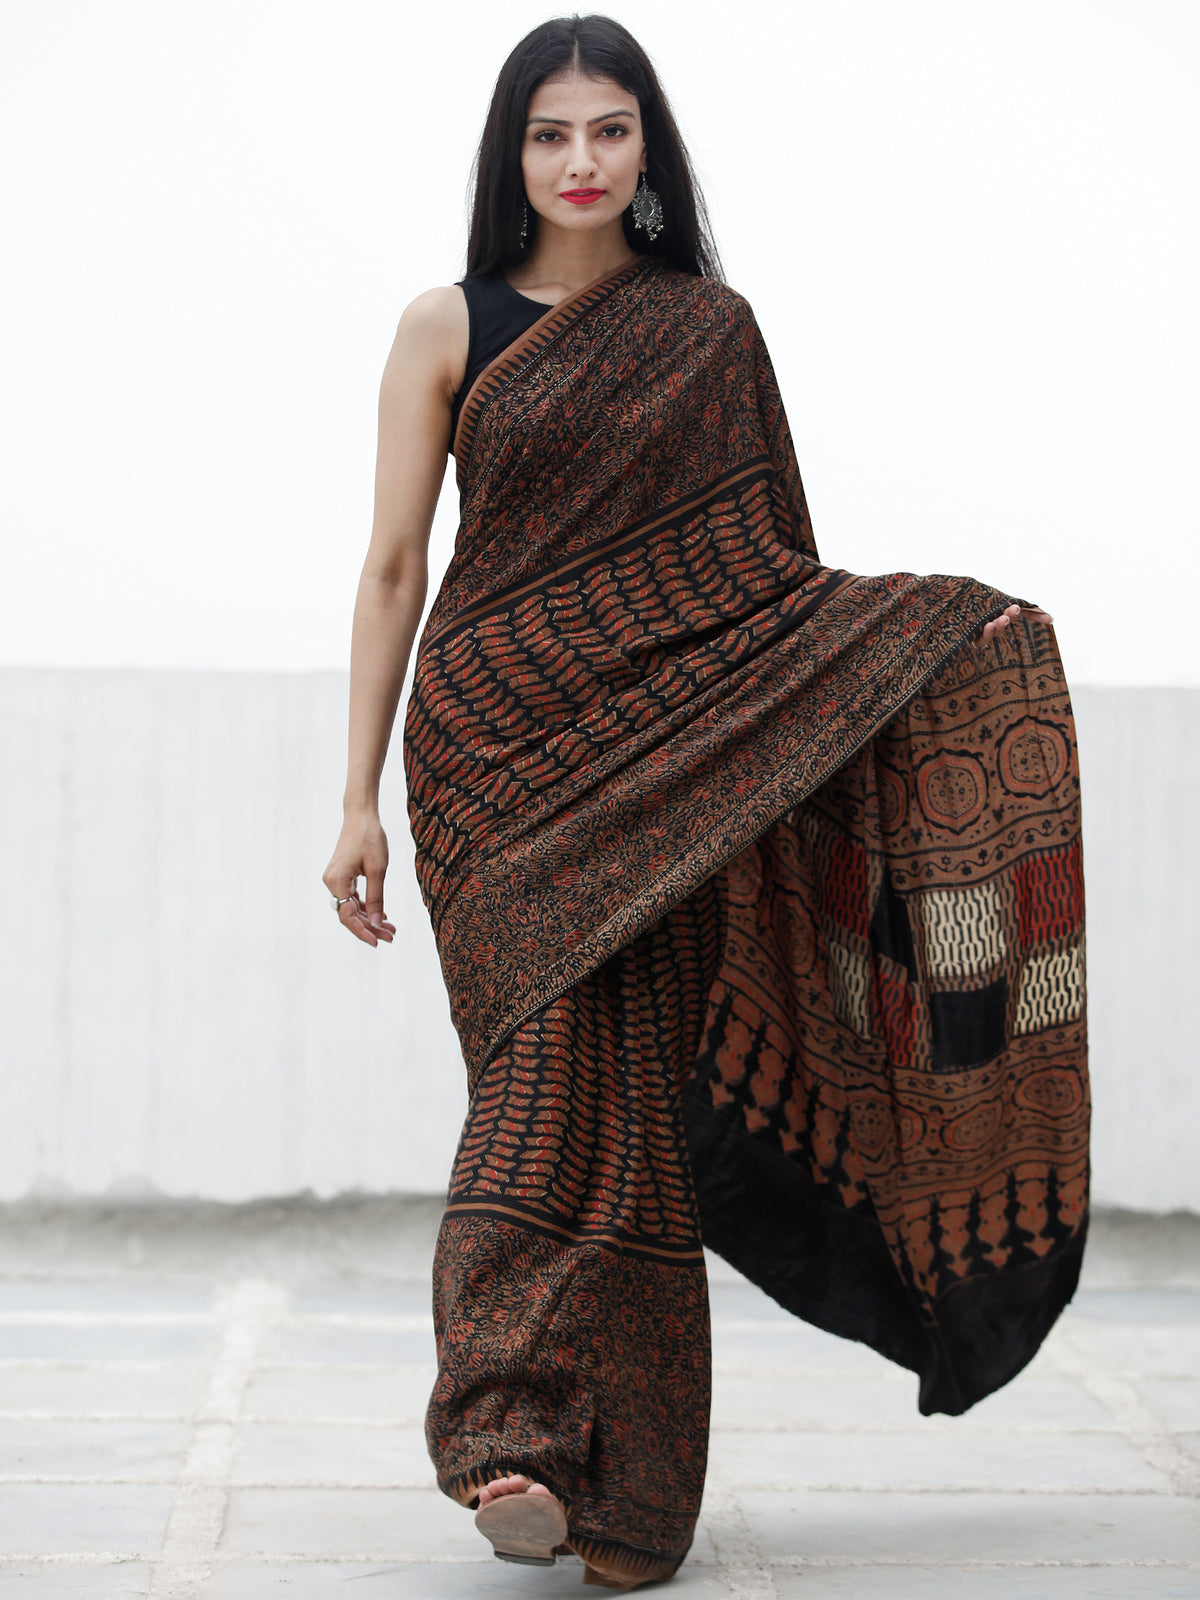 Coffee Brown Black Red Ivory Ajrakh Hand Block Printed Modal Silk Saree in Natural Colors - S031703701